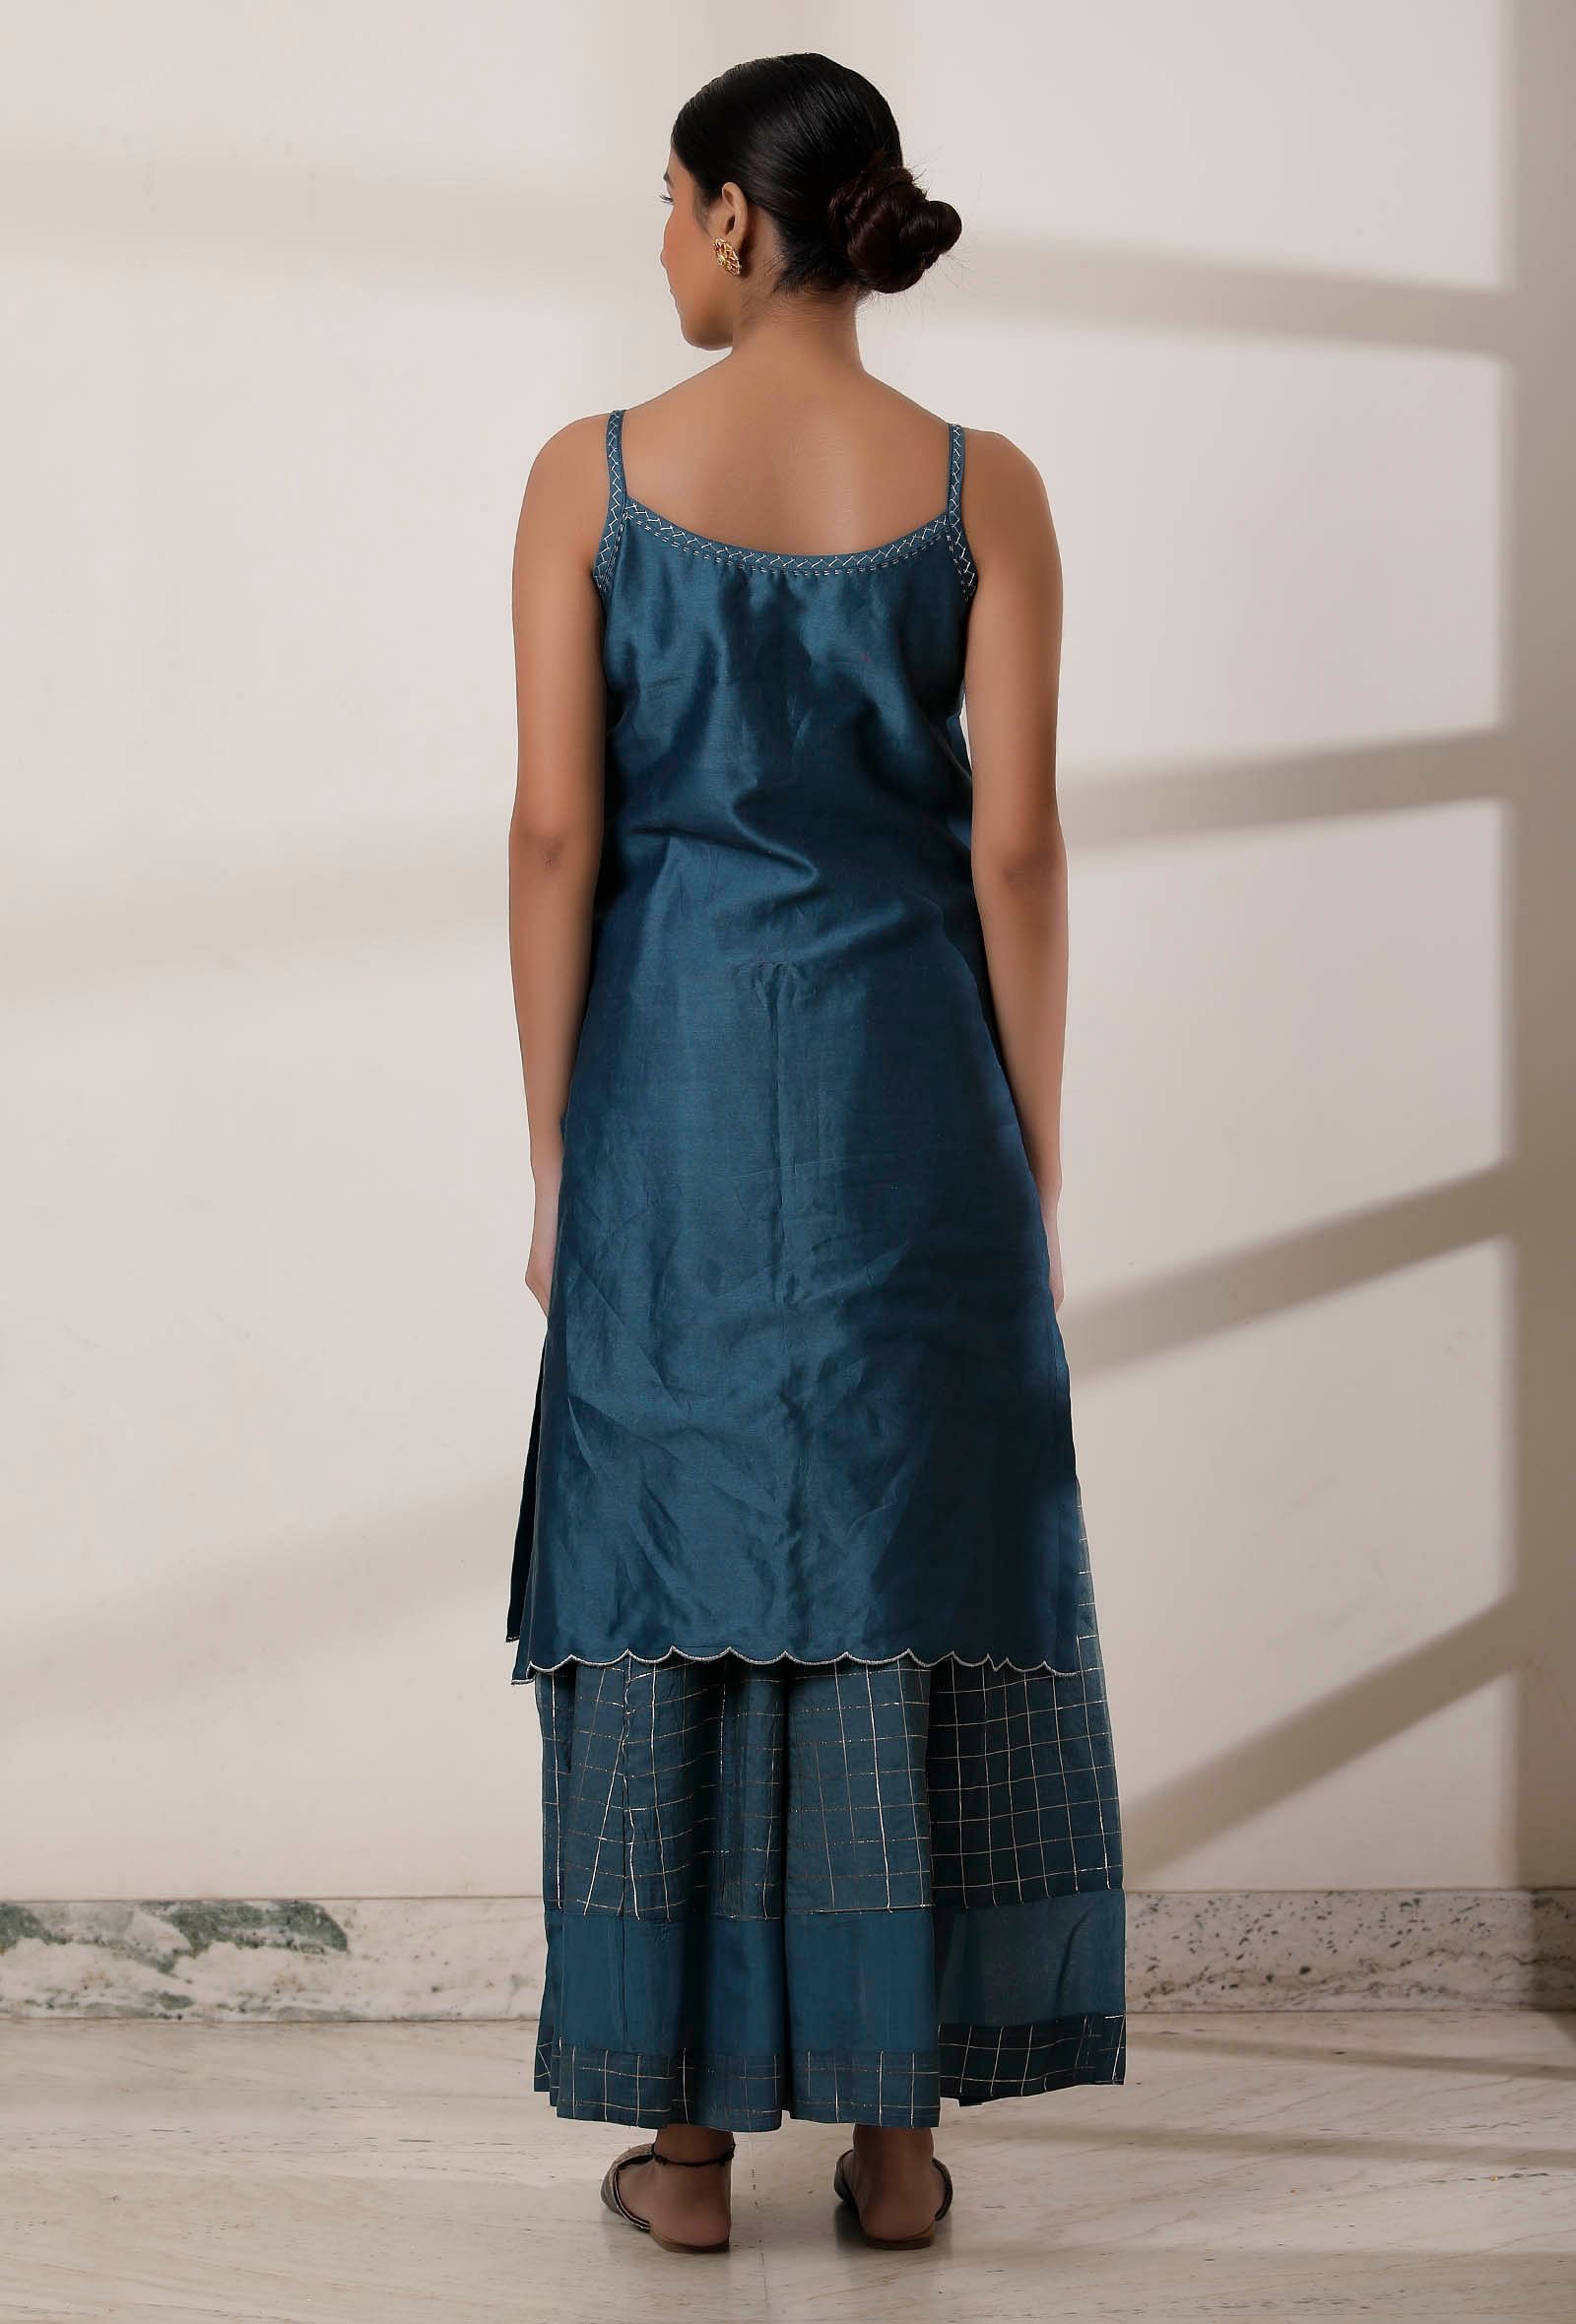 Set of 2: Teal Blue Slip and Chanderi Palazzo